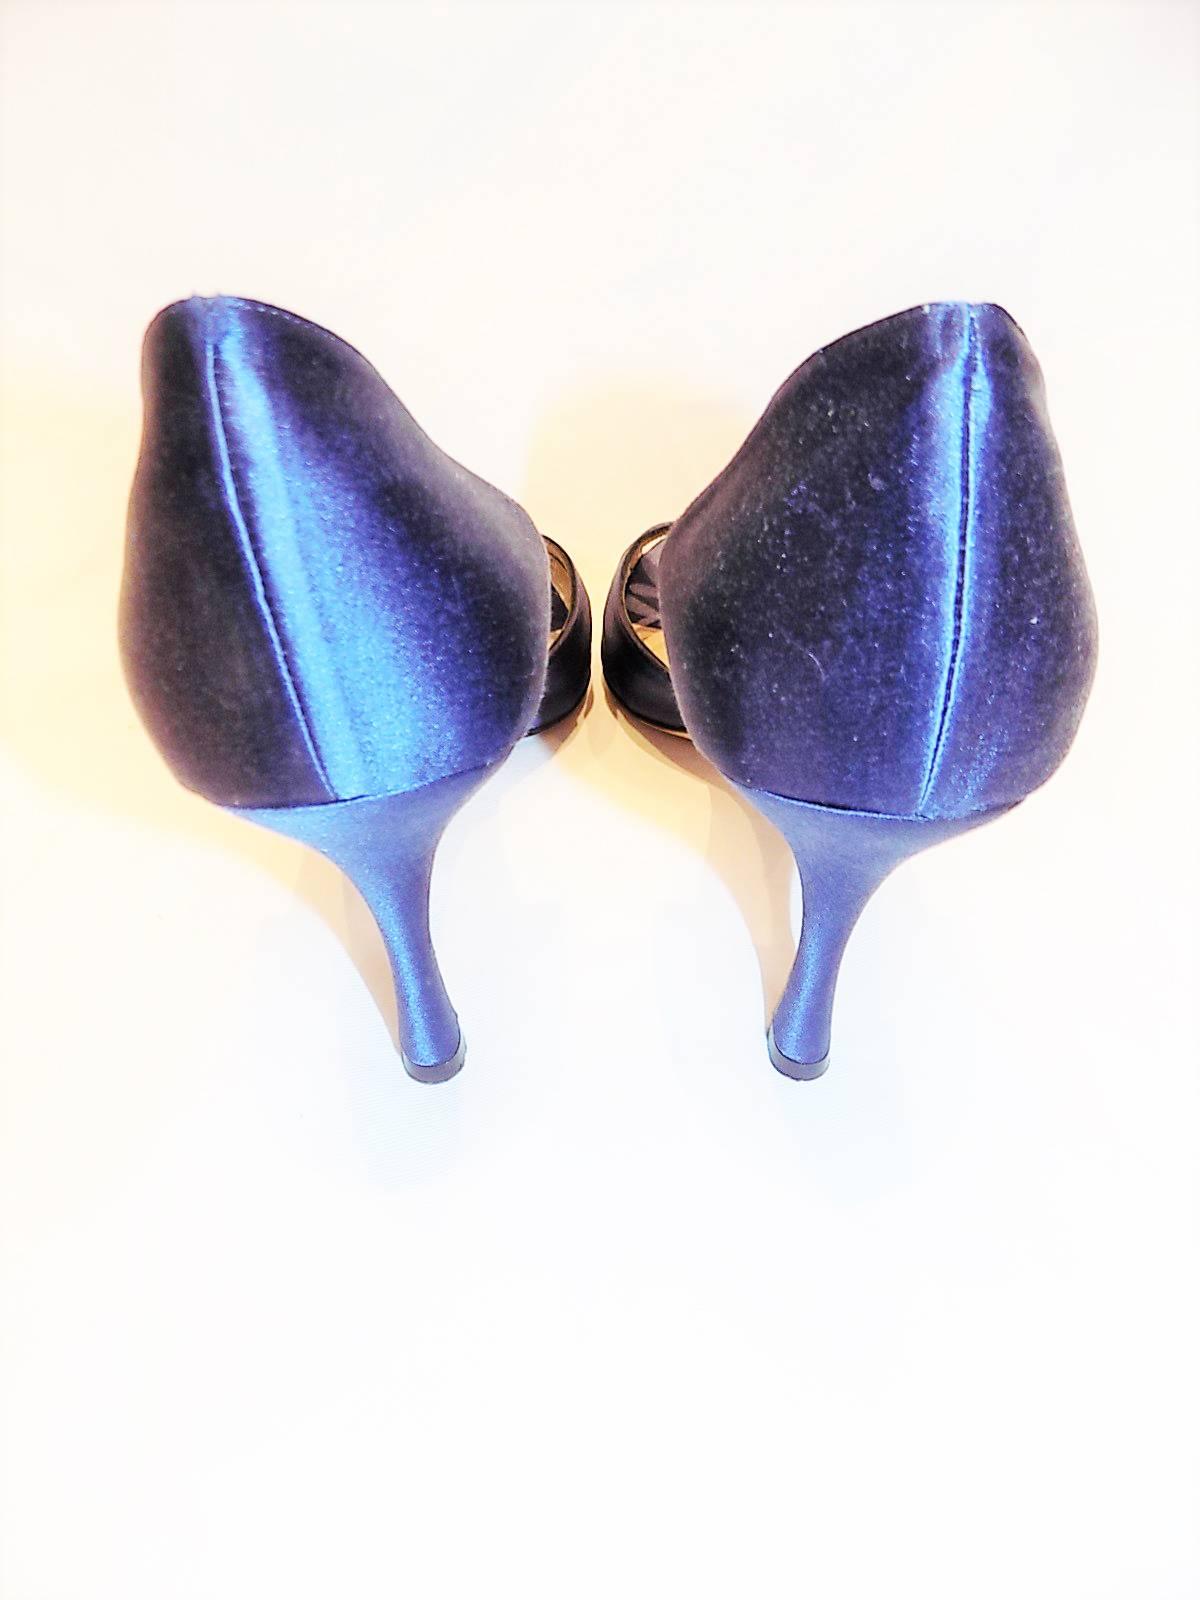 Manolo Blahnik navy/ cobalt  blue satin sandals shoes New sz 38 In New Condition In New York, NY